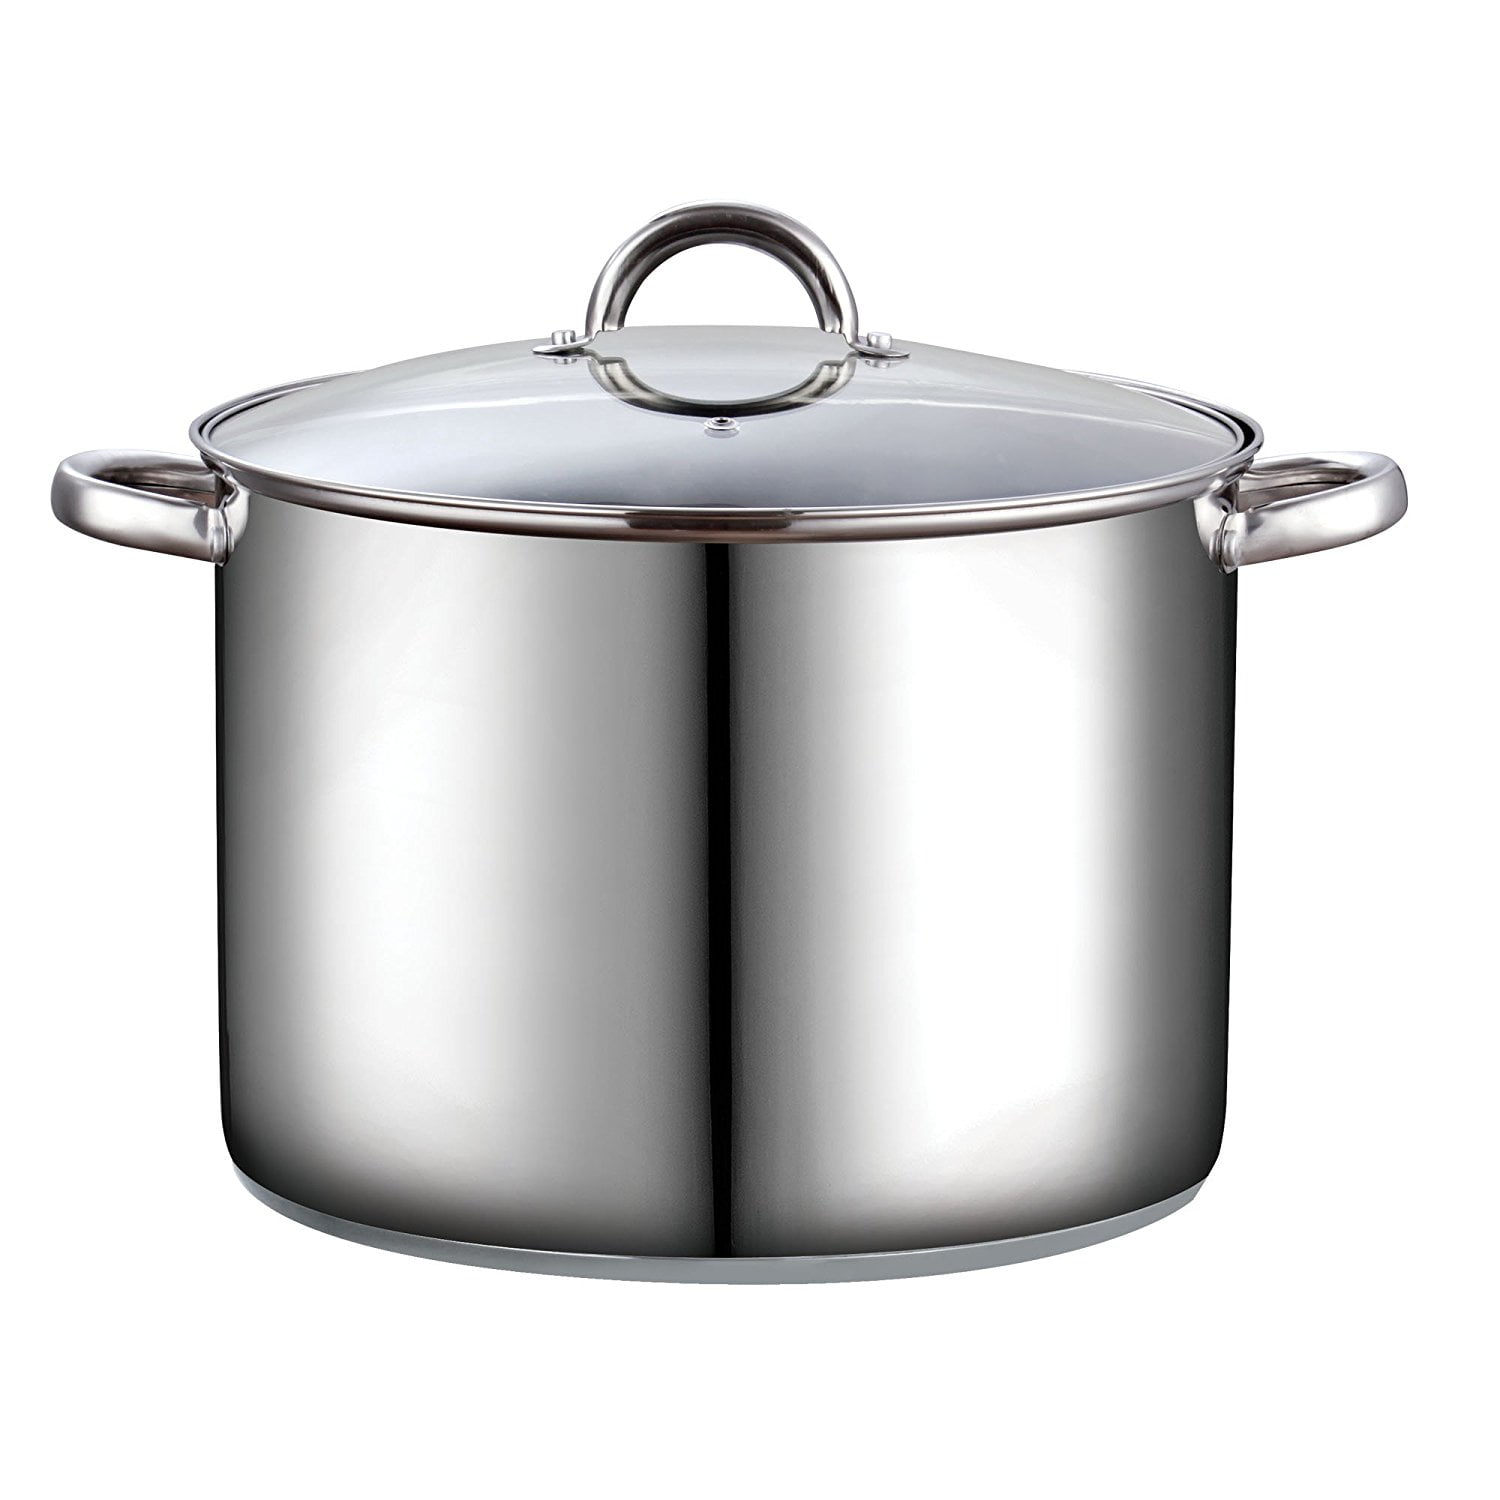 Details about   8 12 16 Quart Stainless Steel Stockpot With Lid Soup Stew Stock Kitchen Cooking 